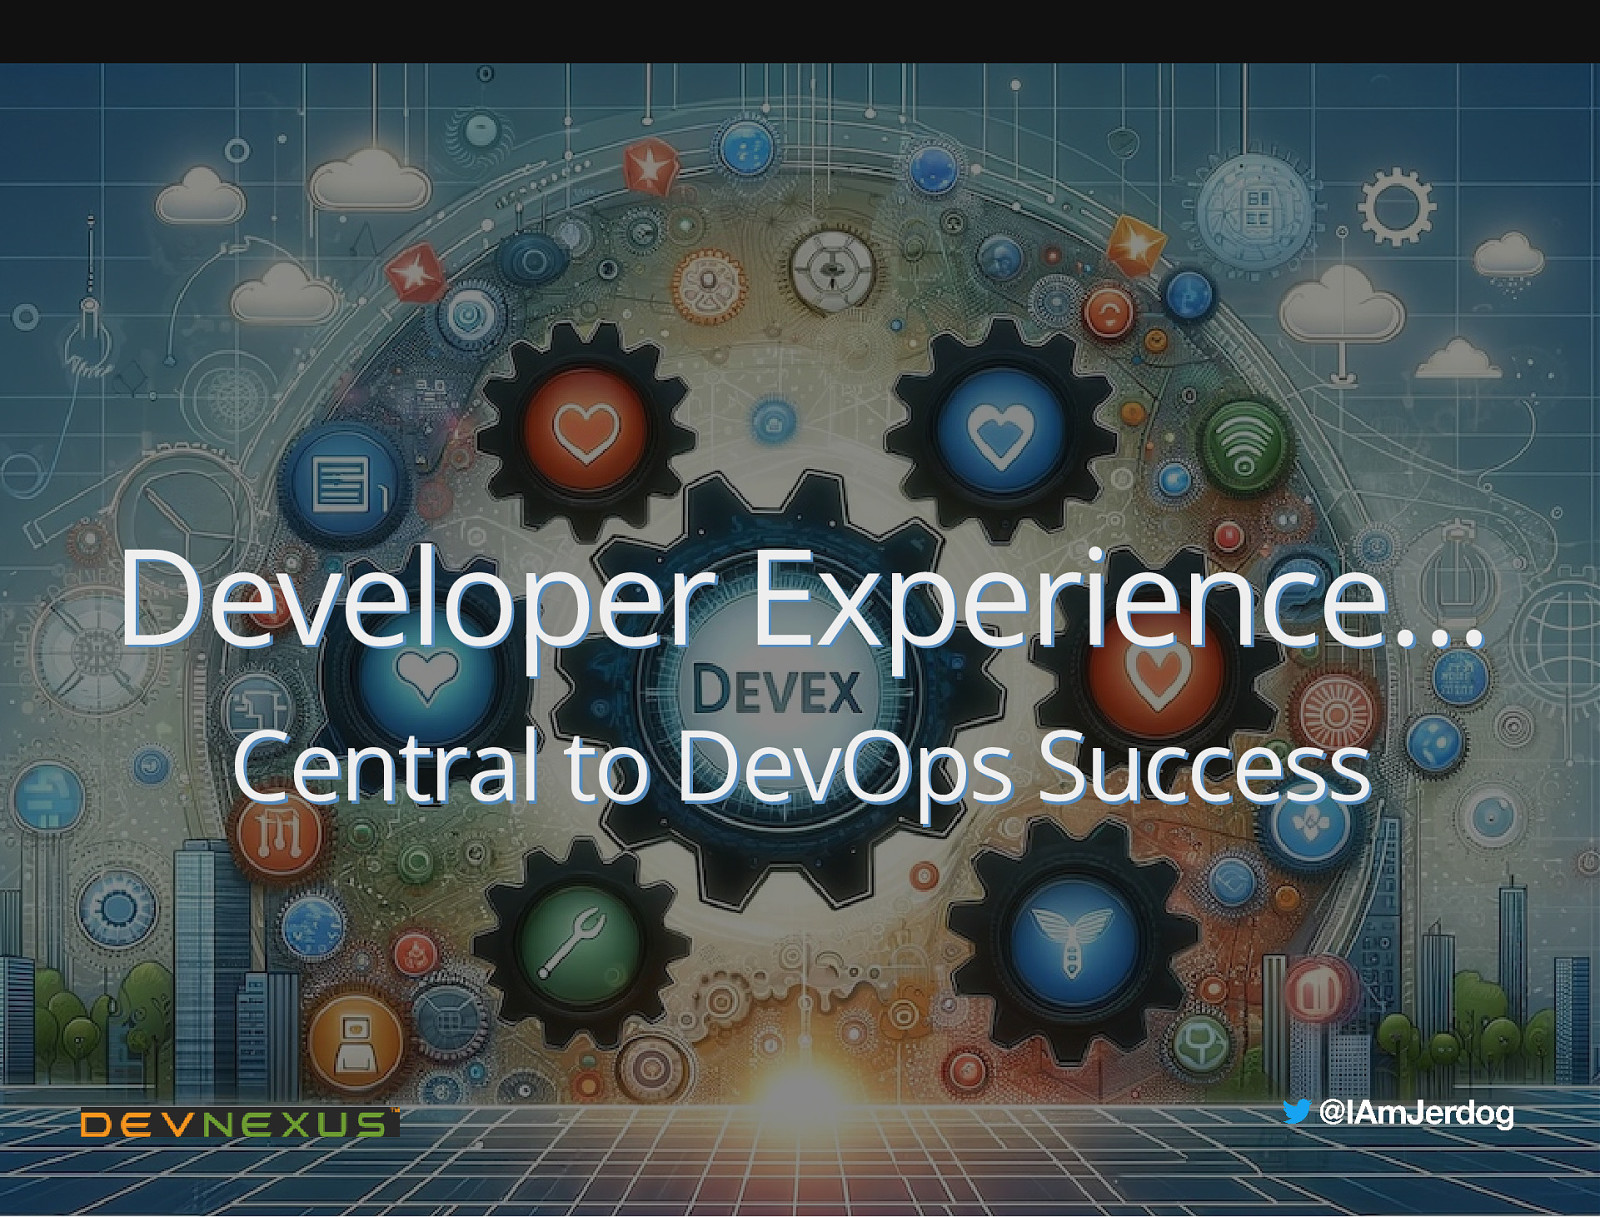 Developer Experience is central to DevOps success